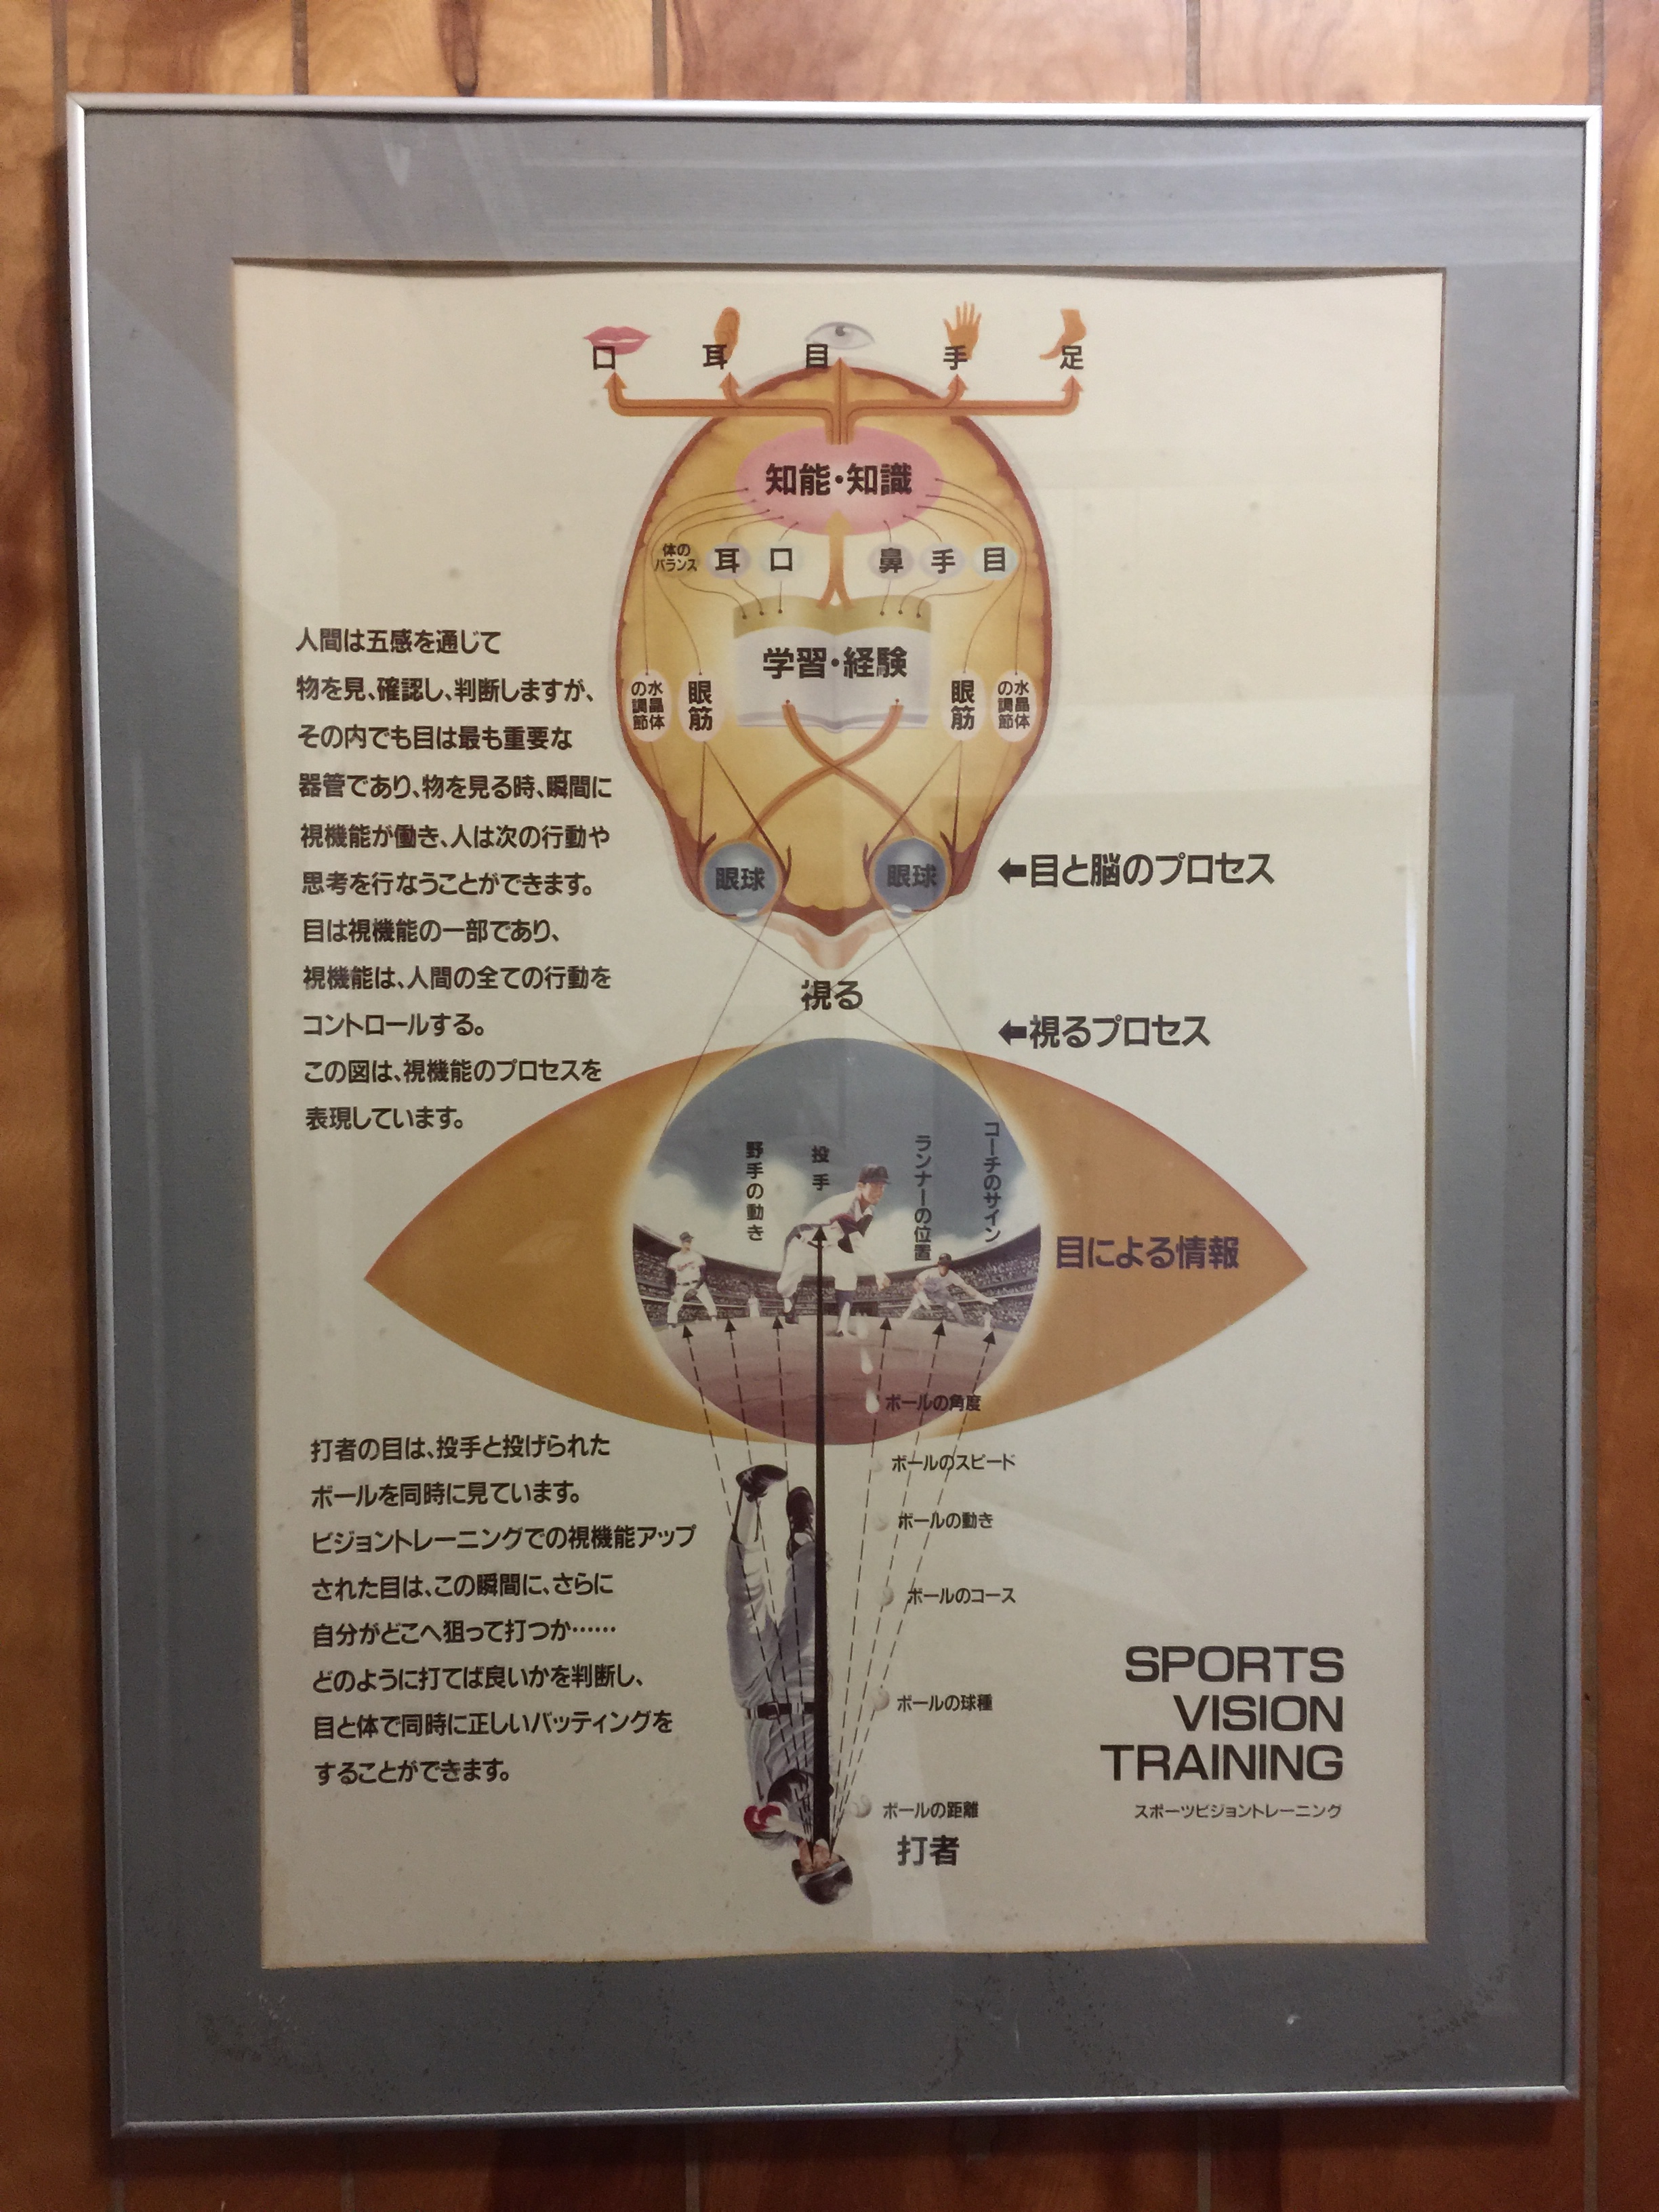 Sports Vision Training Poster - Optometric Center of Tokyo